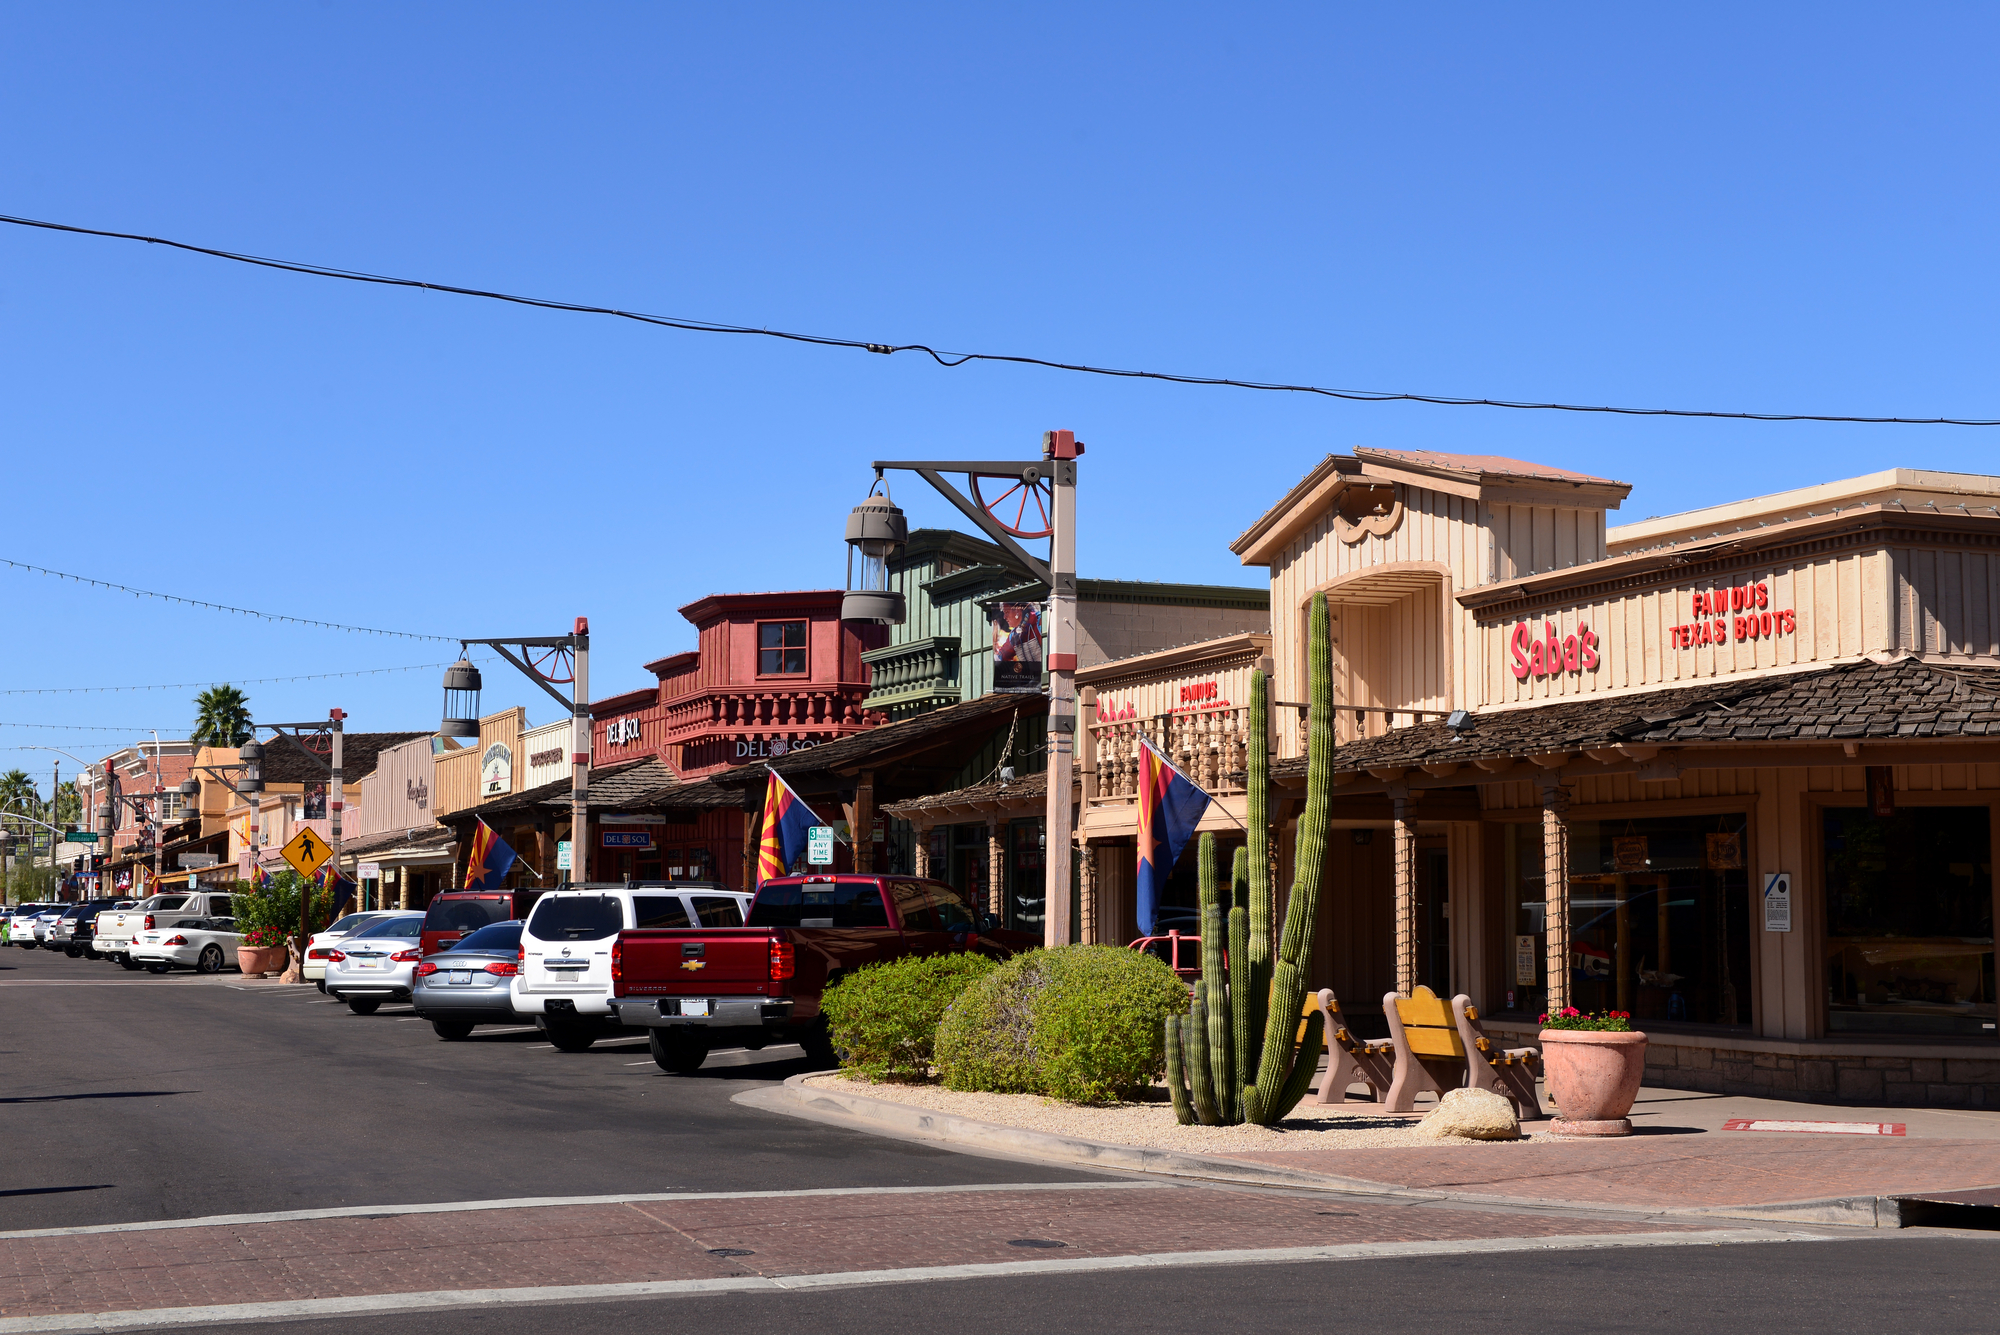 Shops and Galleries in Old Town Scottsdale